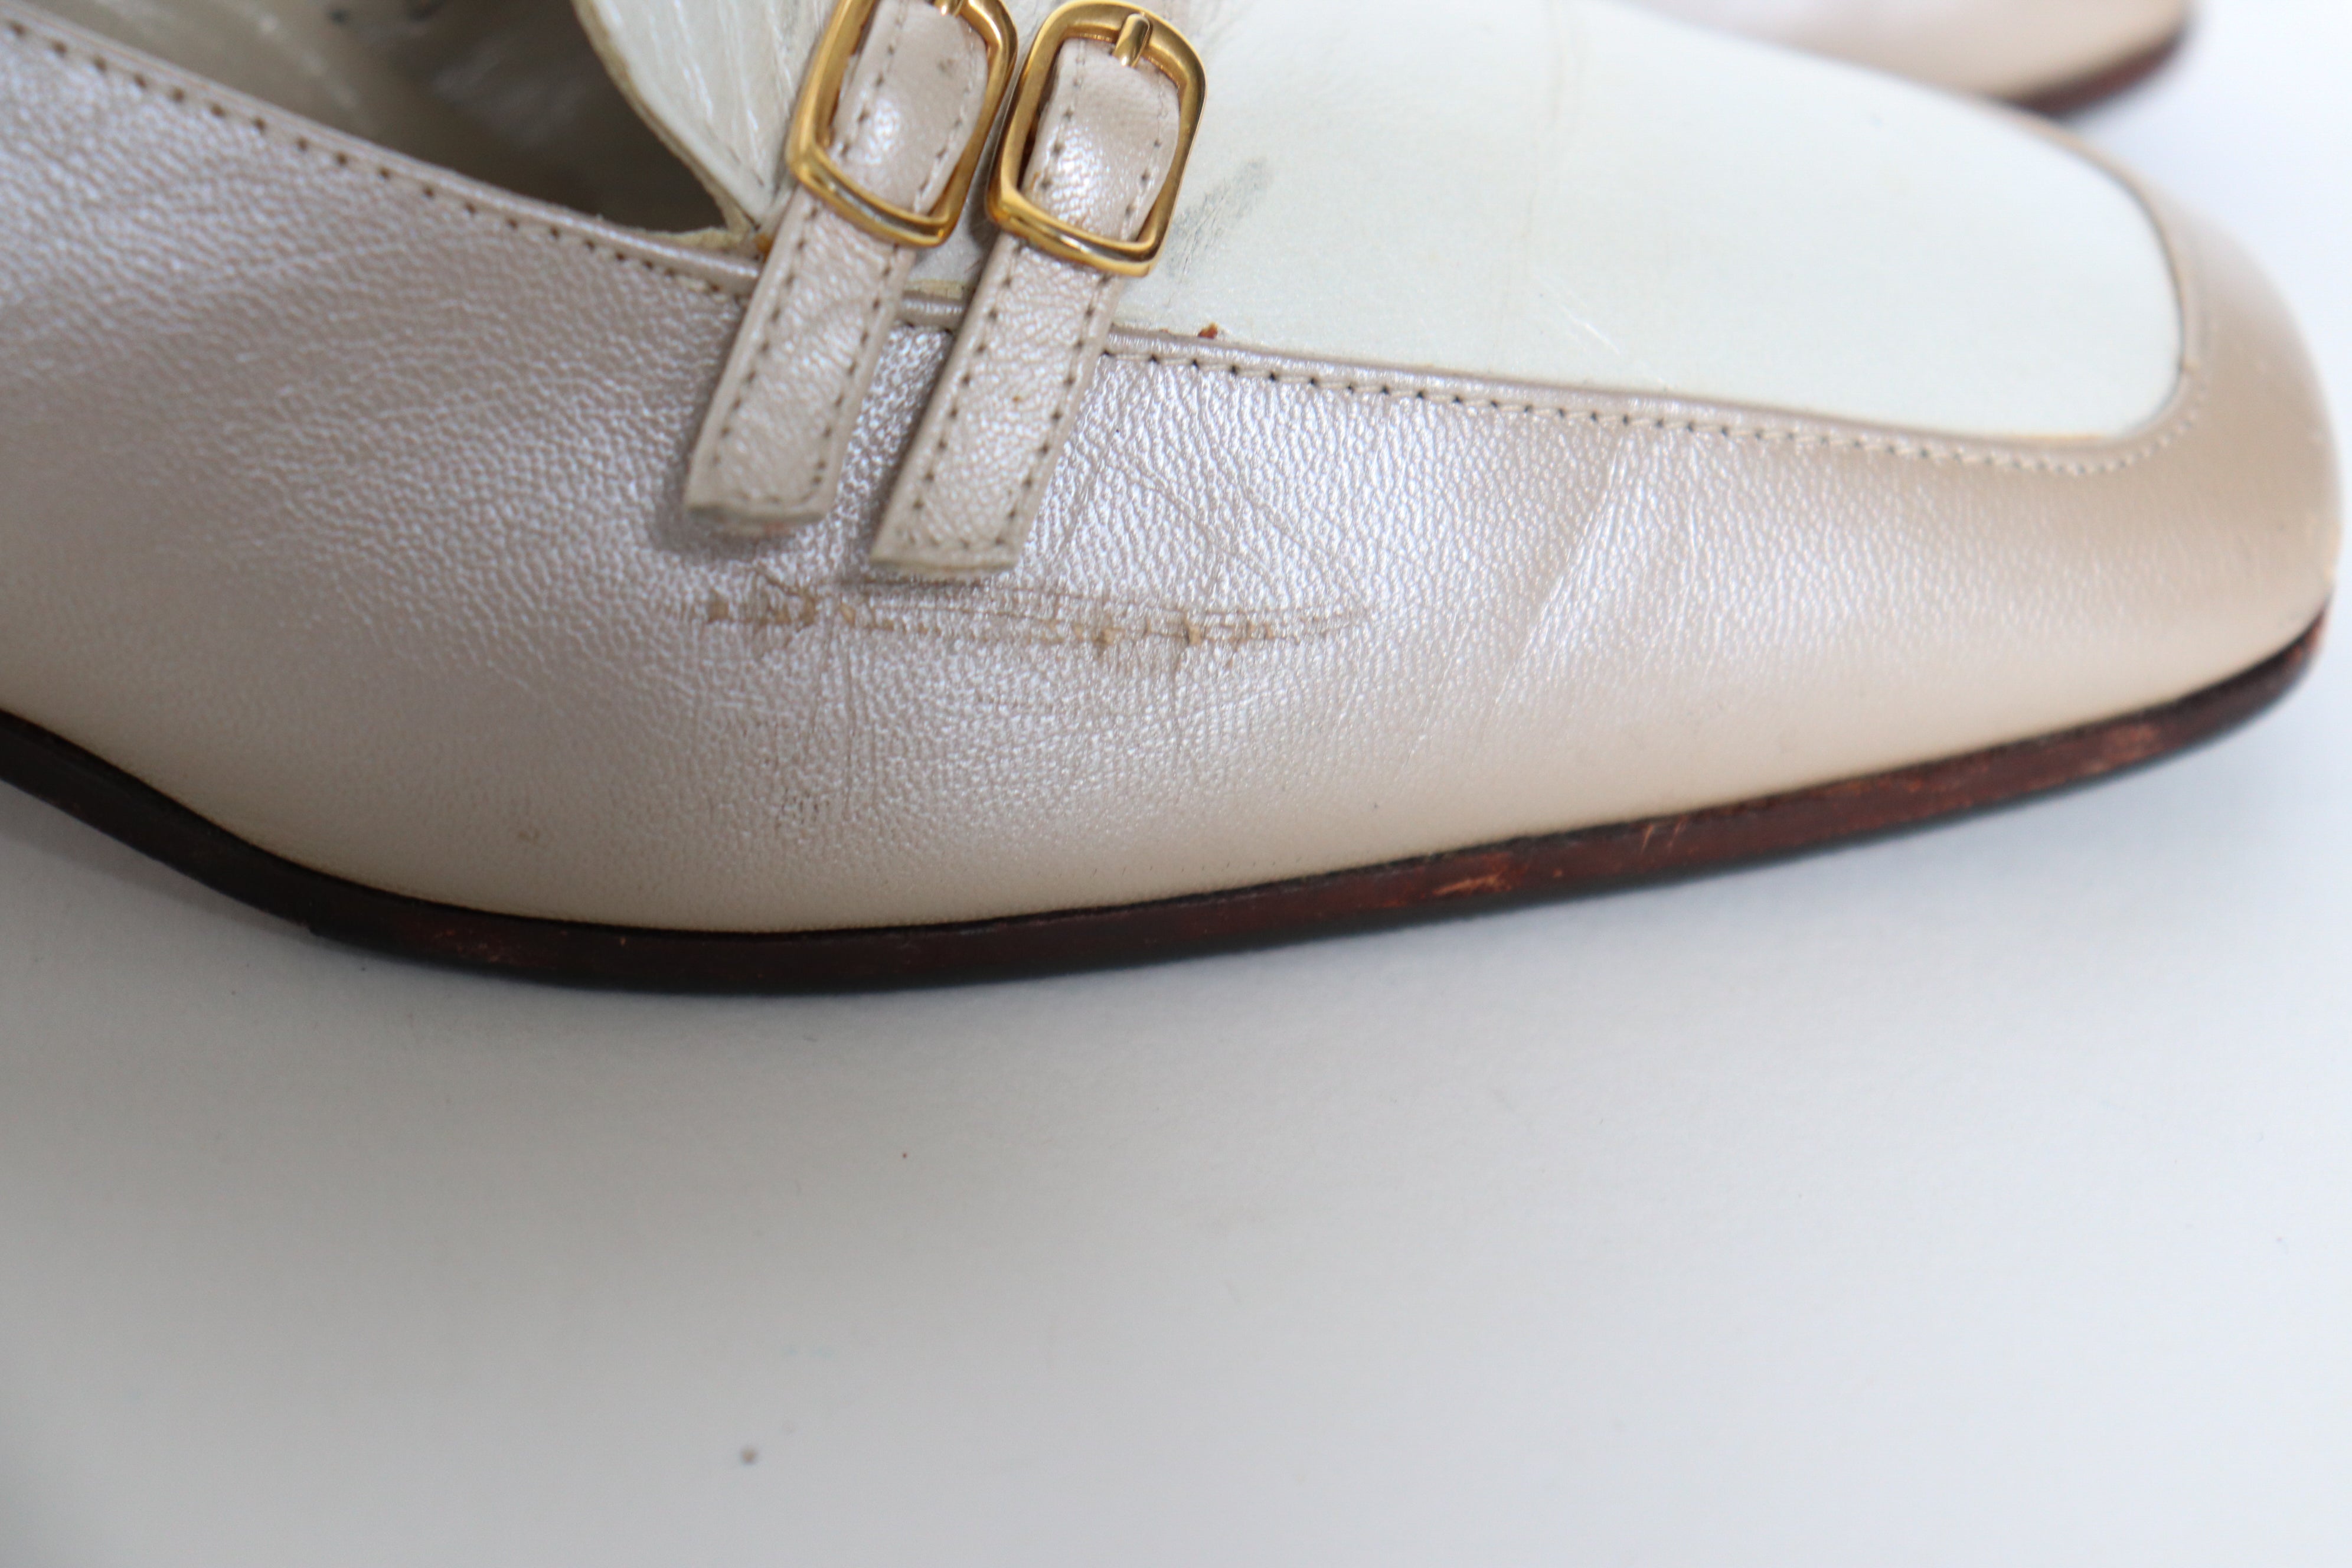 Vintage Heel Loafers - Beige / White  Leather - Fit Wide 37.5 /  38